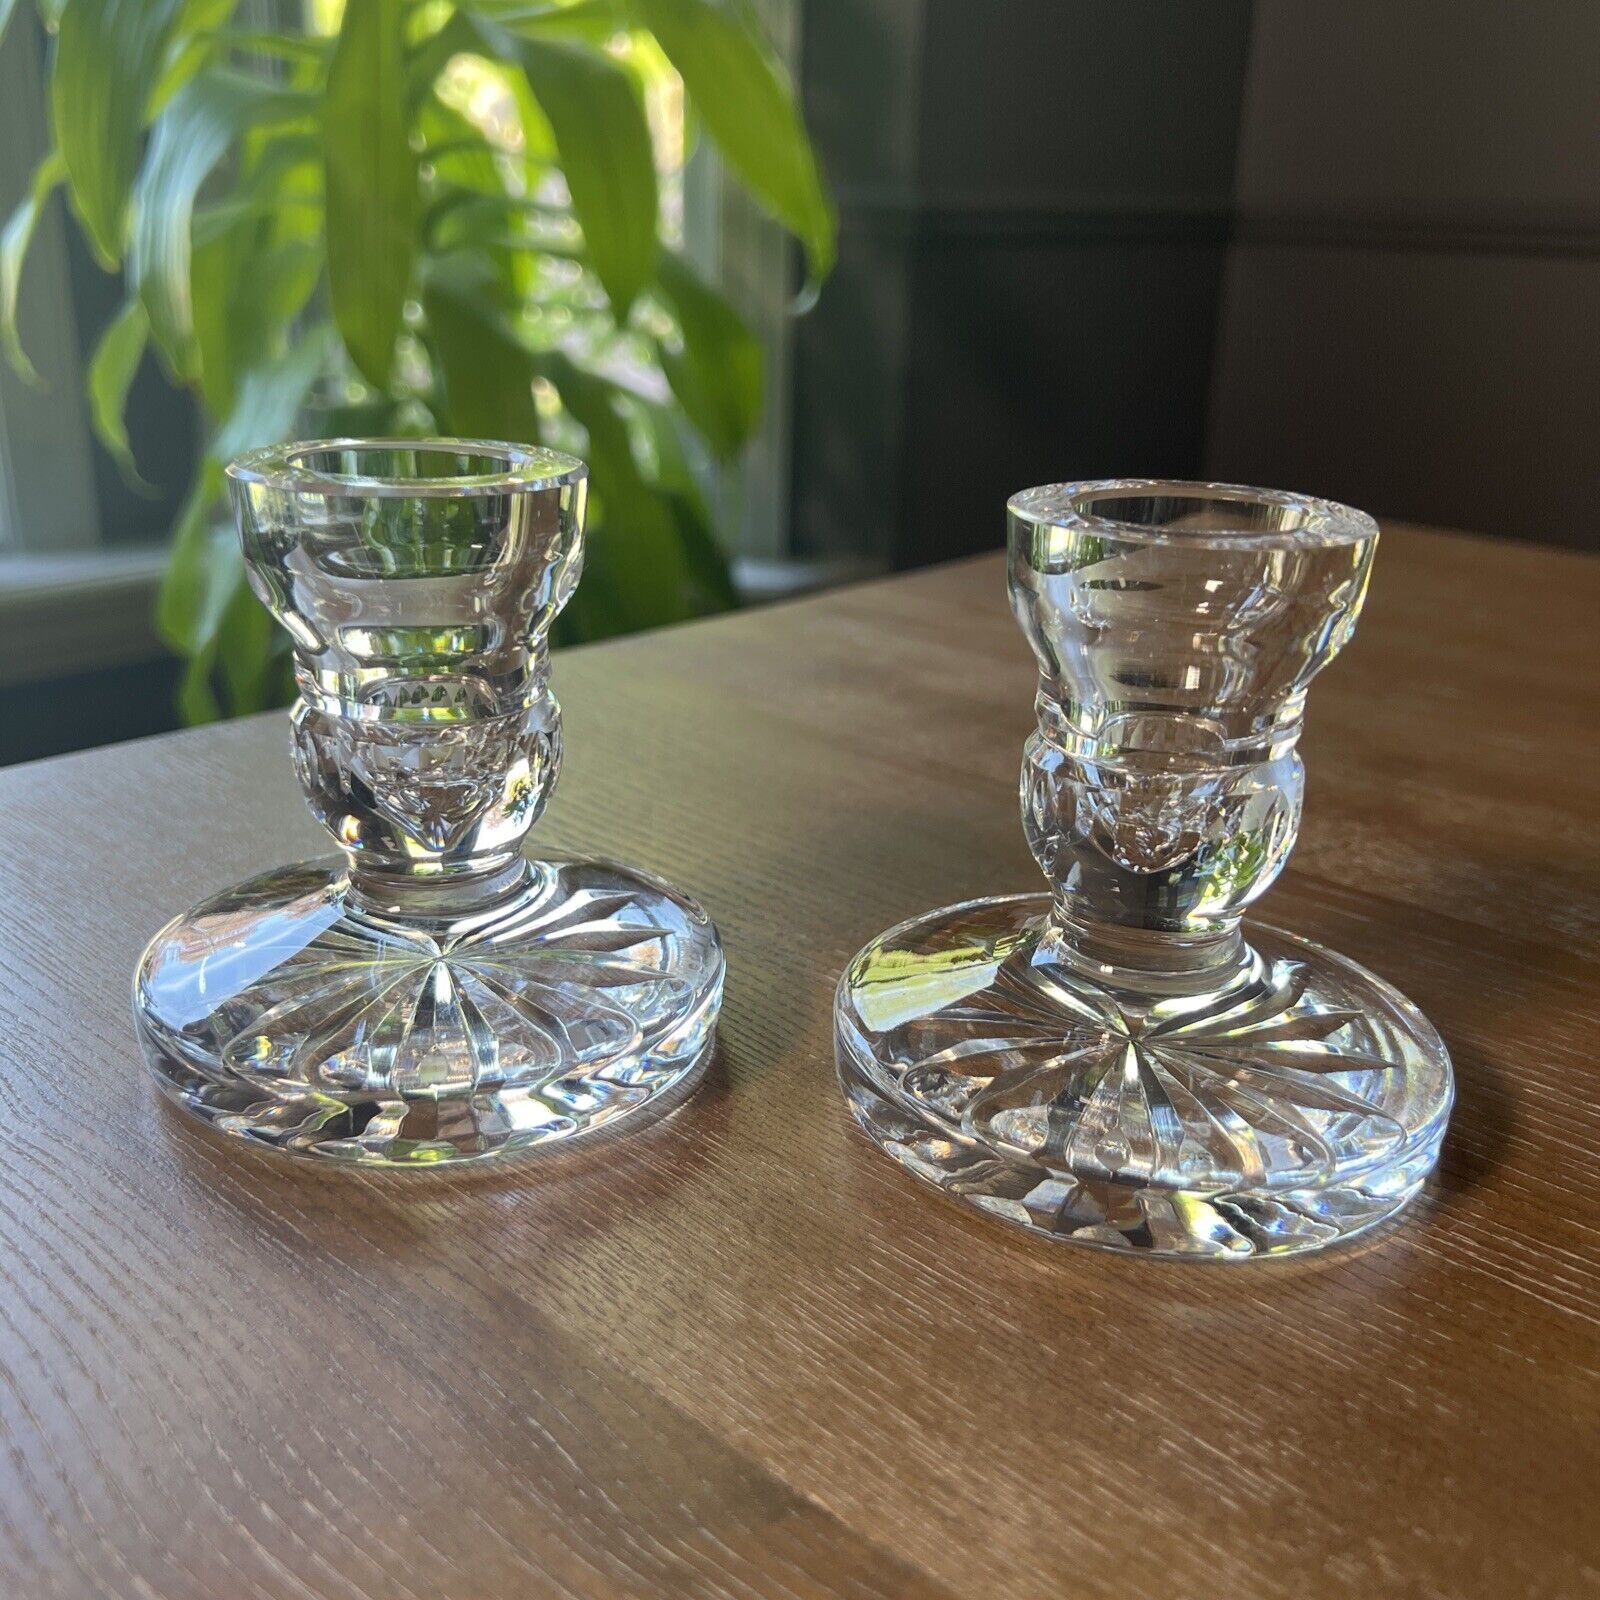 Vintage Pair of Waterford Blarney Short Pillar Candle Holders - Glass Crystal